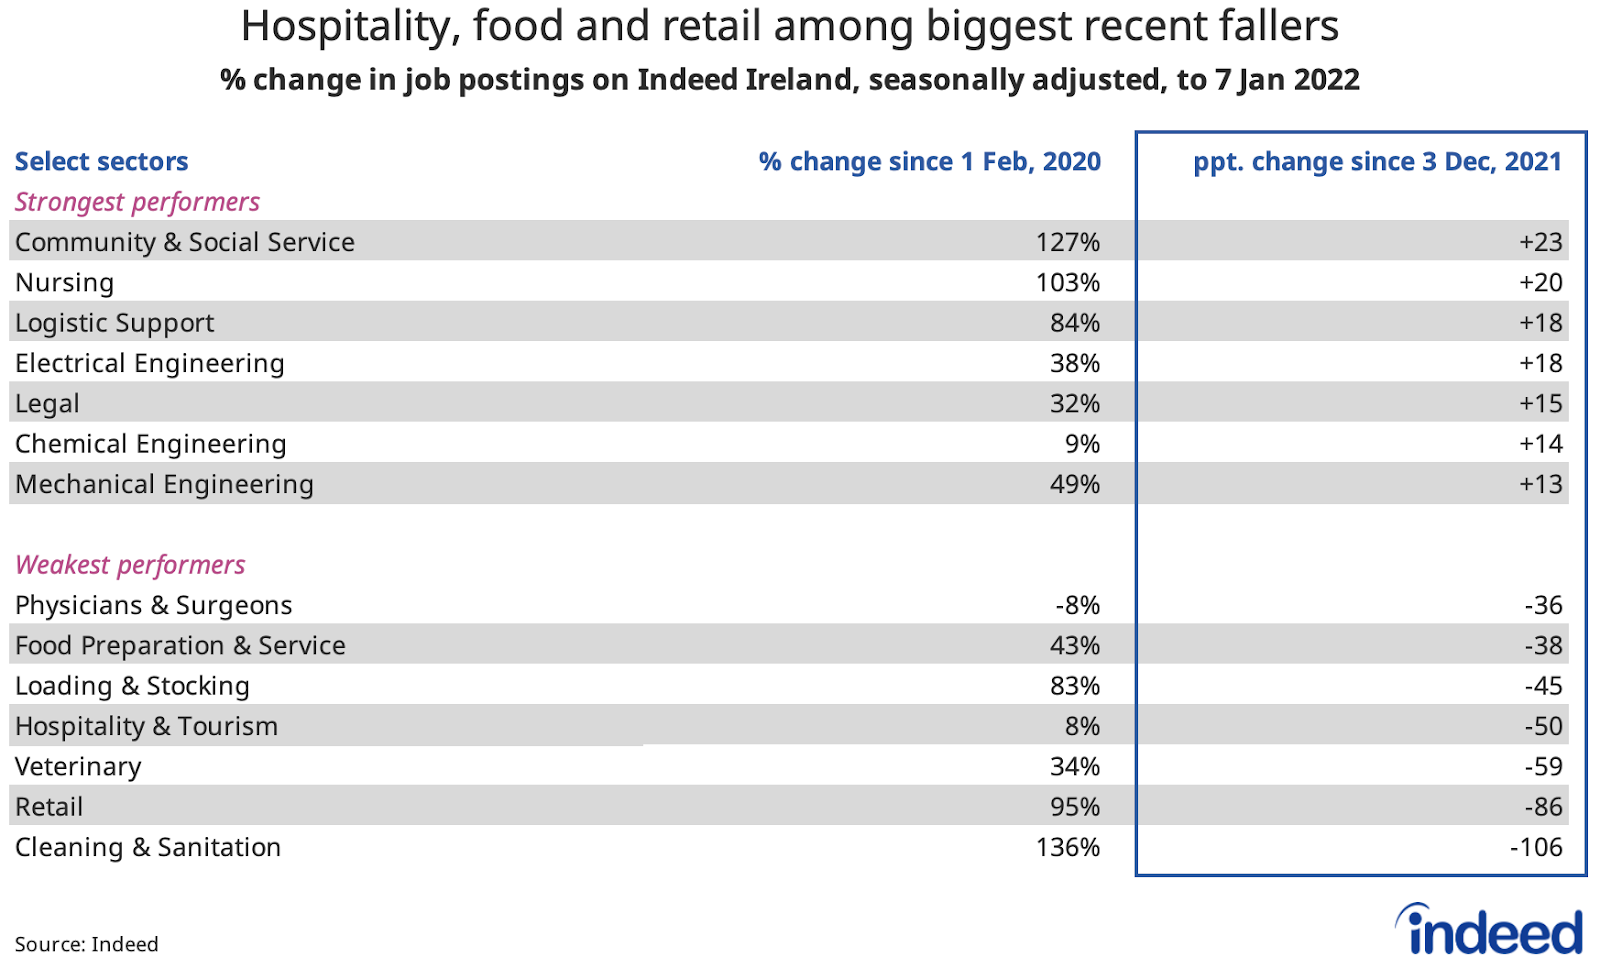 Table titled “Hospitality, food and retail among biggest recent fallers.”